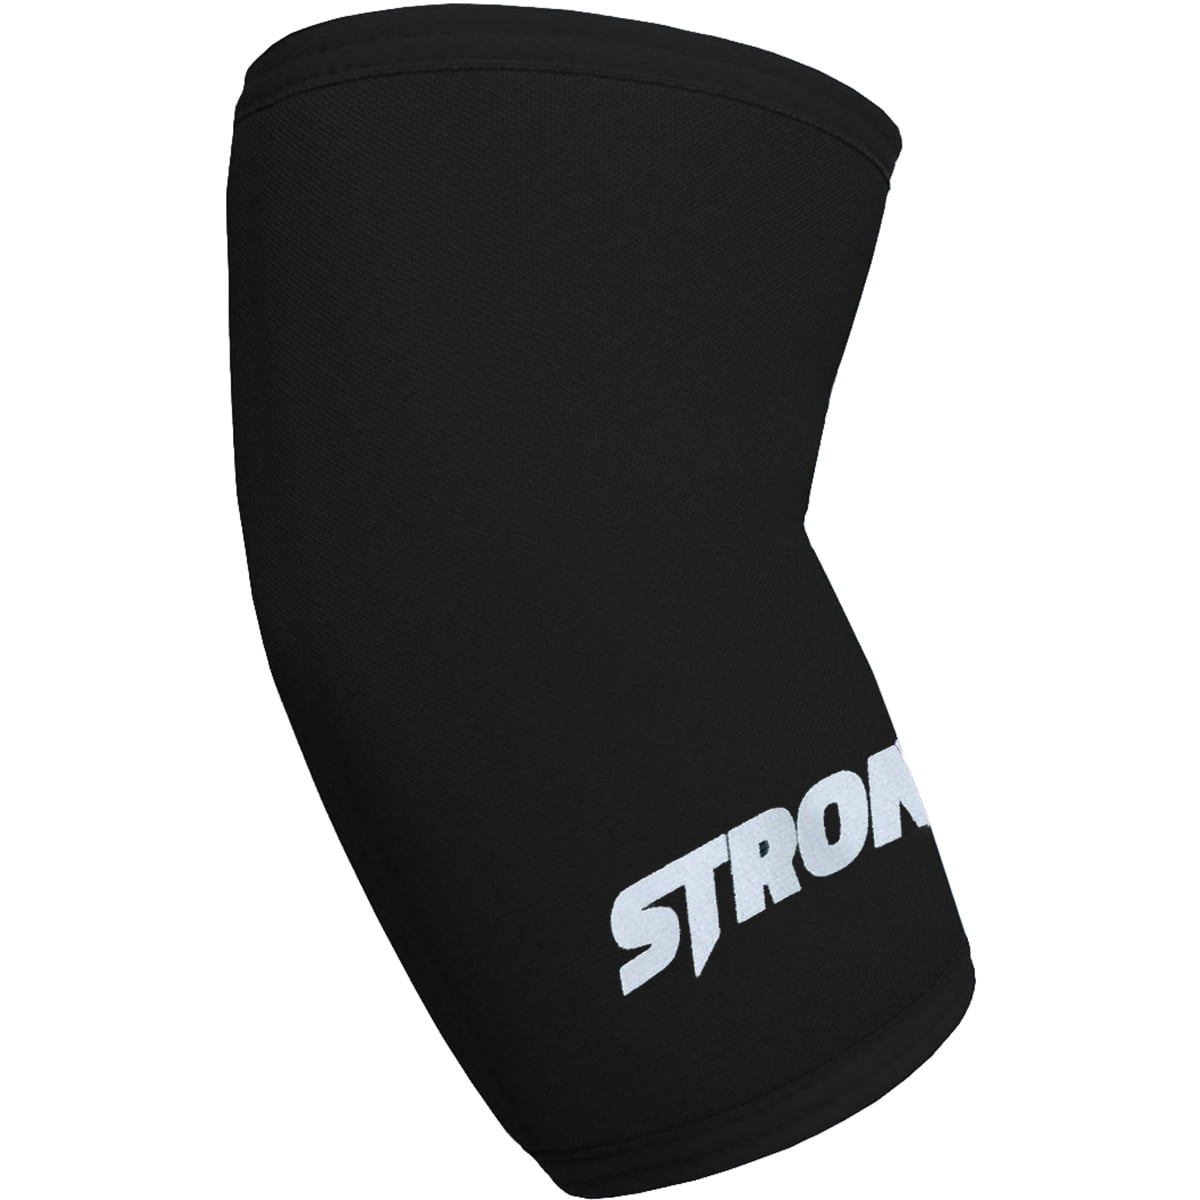 5mm thick Black Sling Shot STrong Compression Elbow Sleeves by Mark Bell 